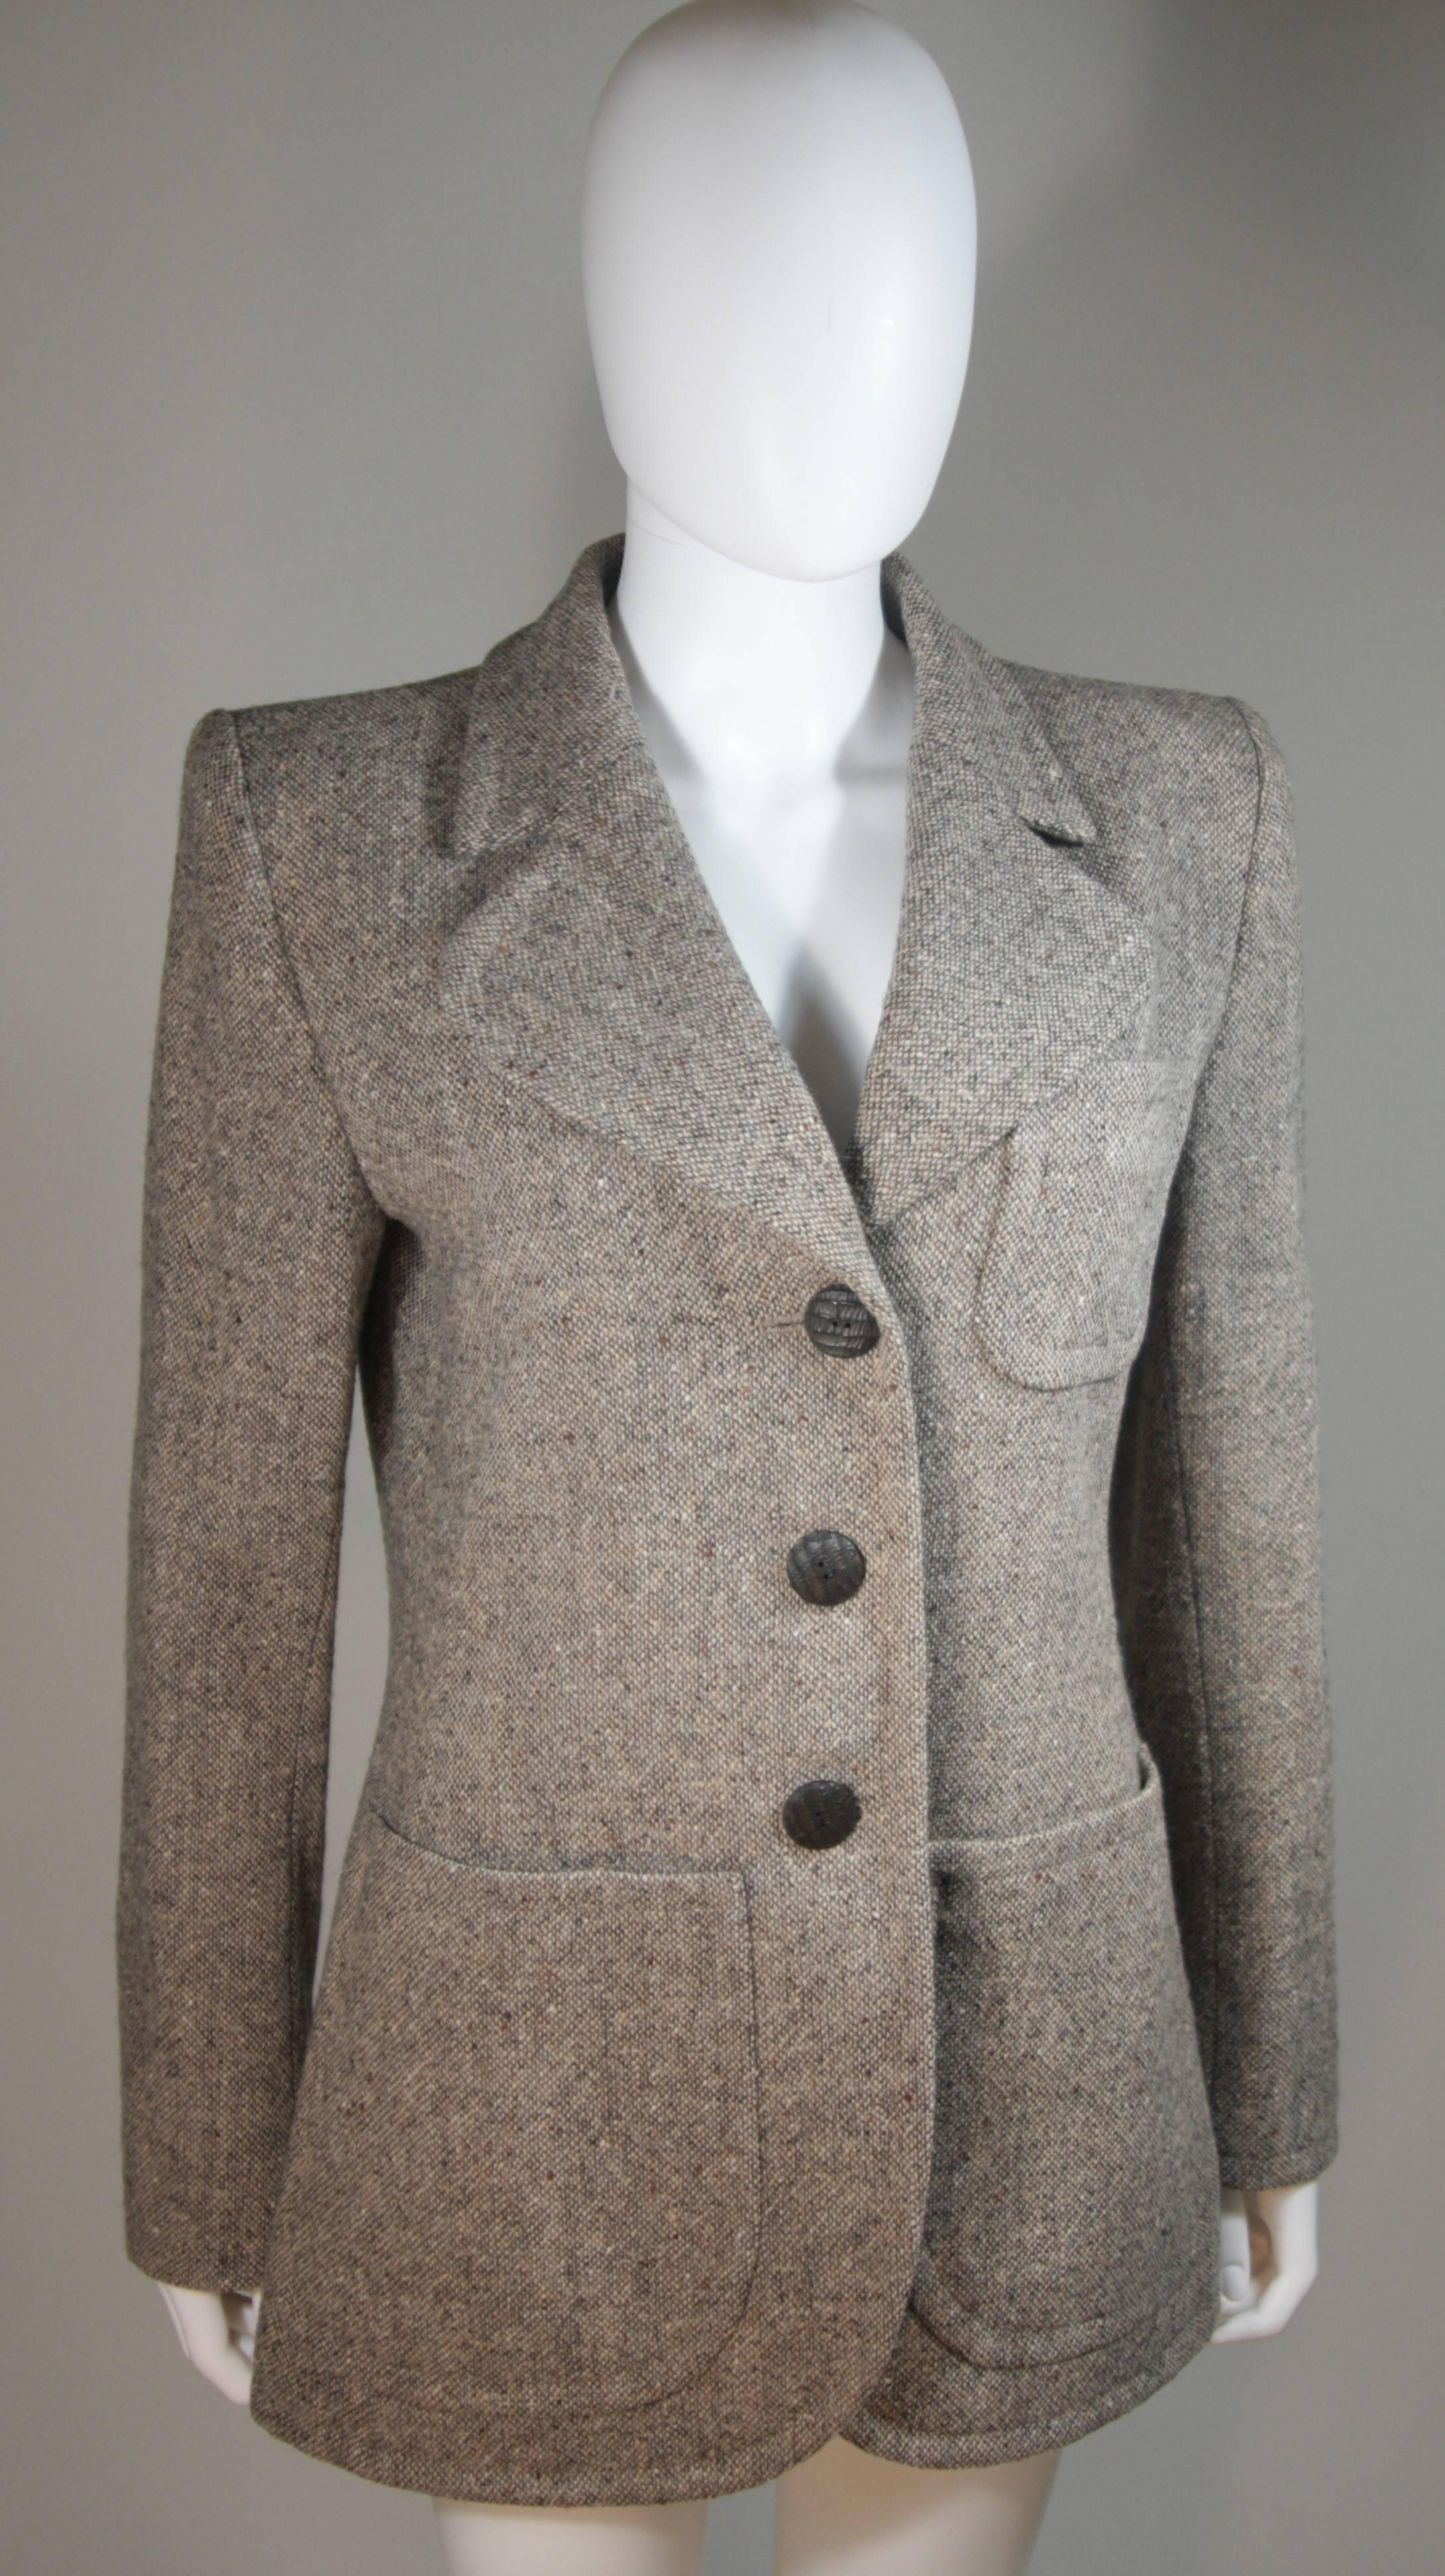 This Yves Saint Laurent design is available for viewing at our Beverly Hills Boutique. We offer a large selection of evening gowns and luxury garments. 

 This jacket is composed of wool and features wood buttons. The buttons feature a chisel